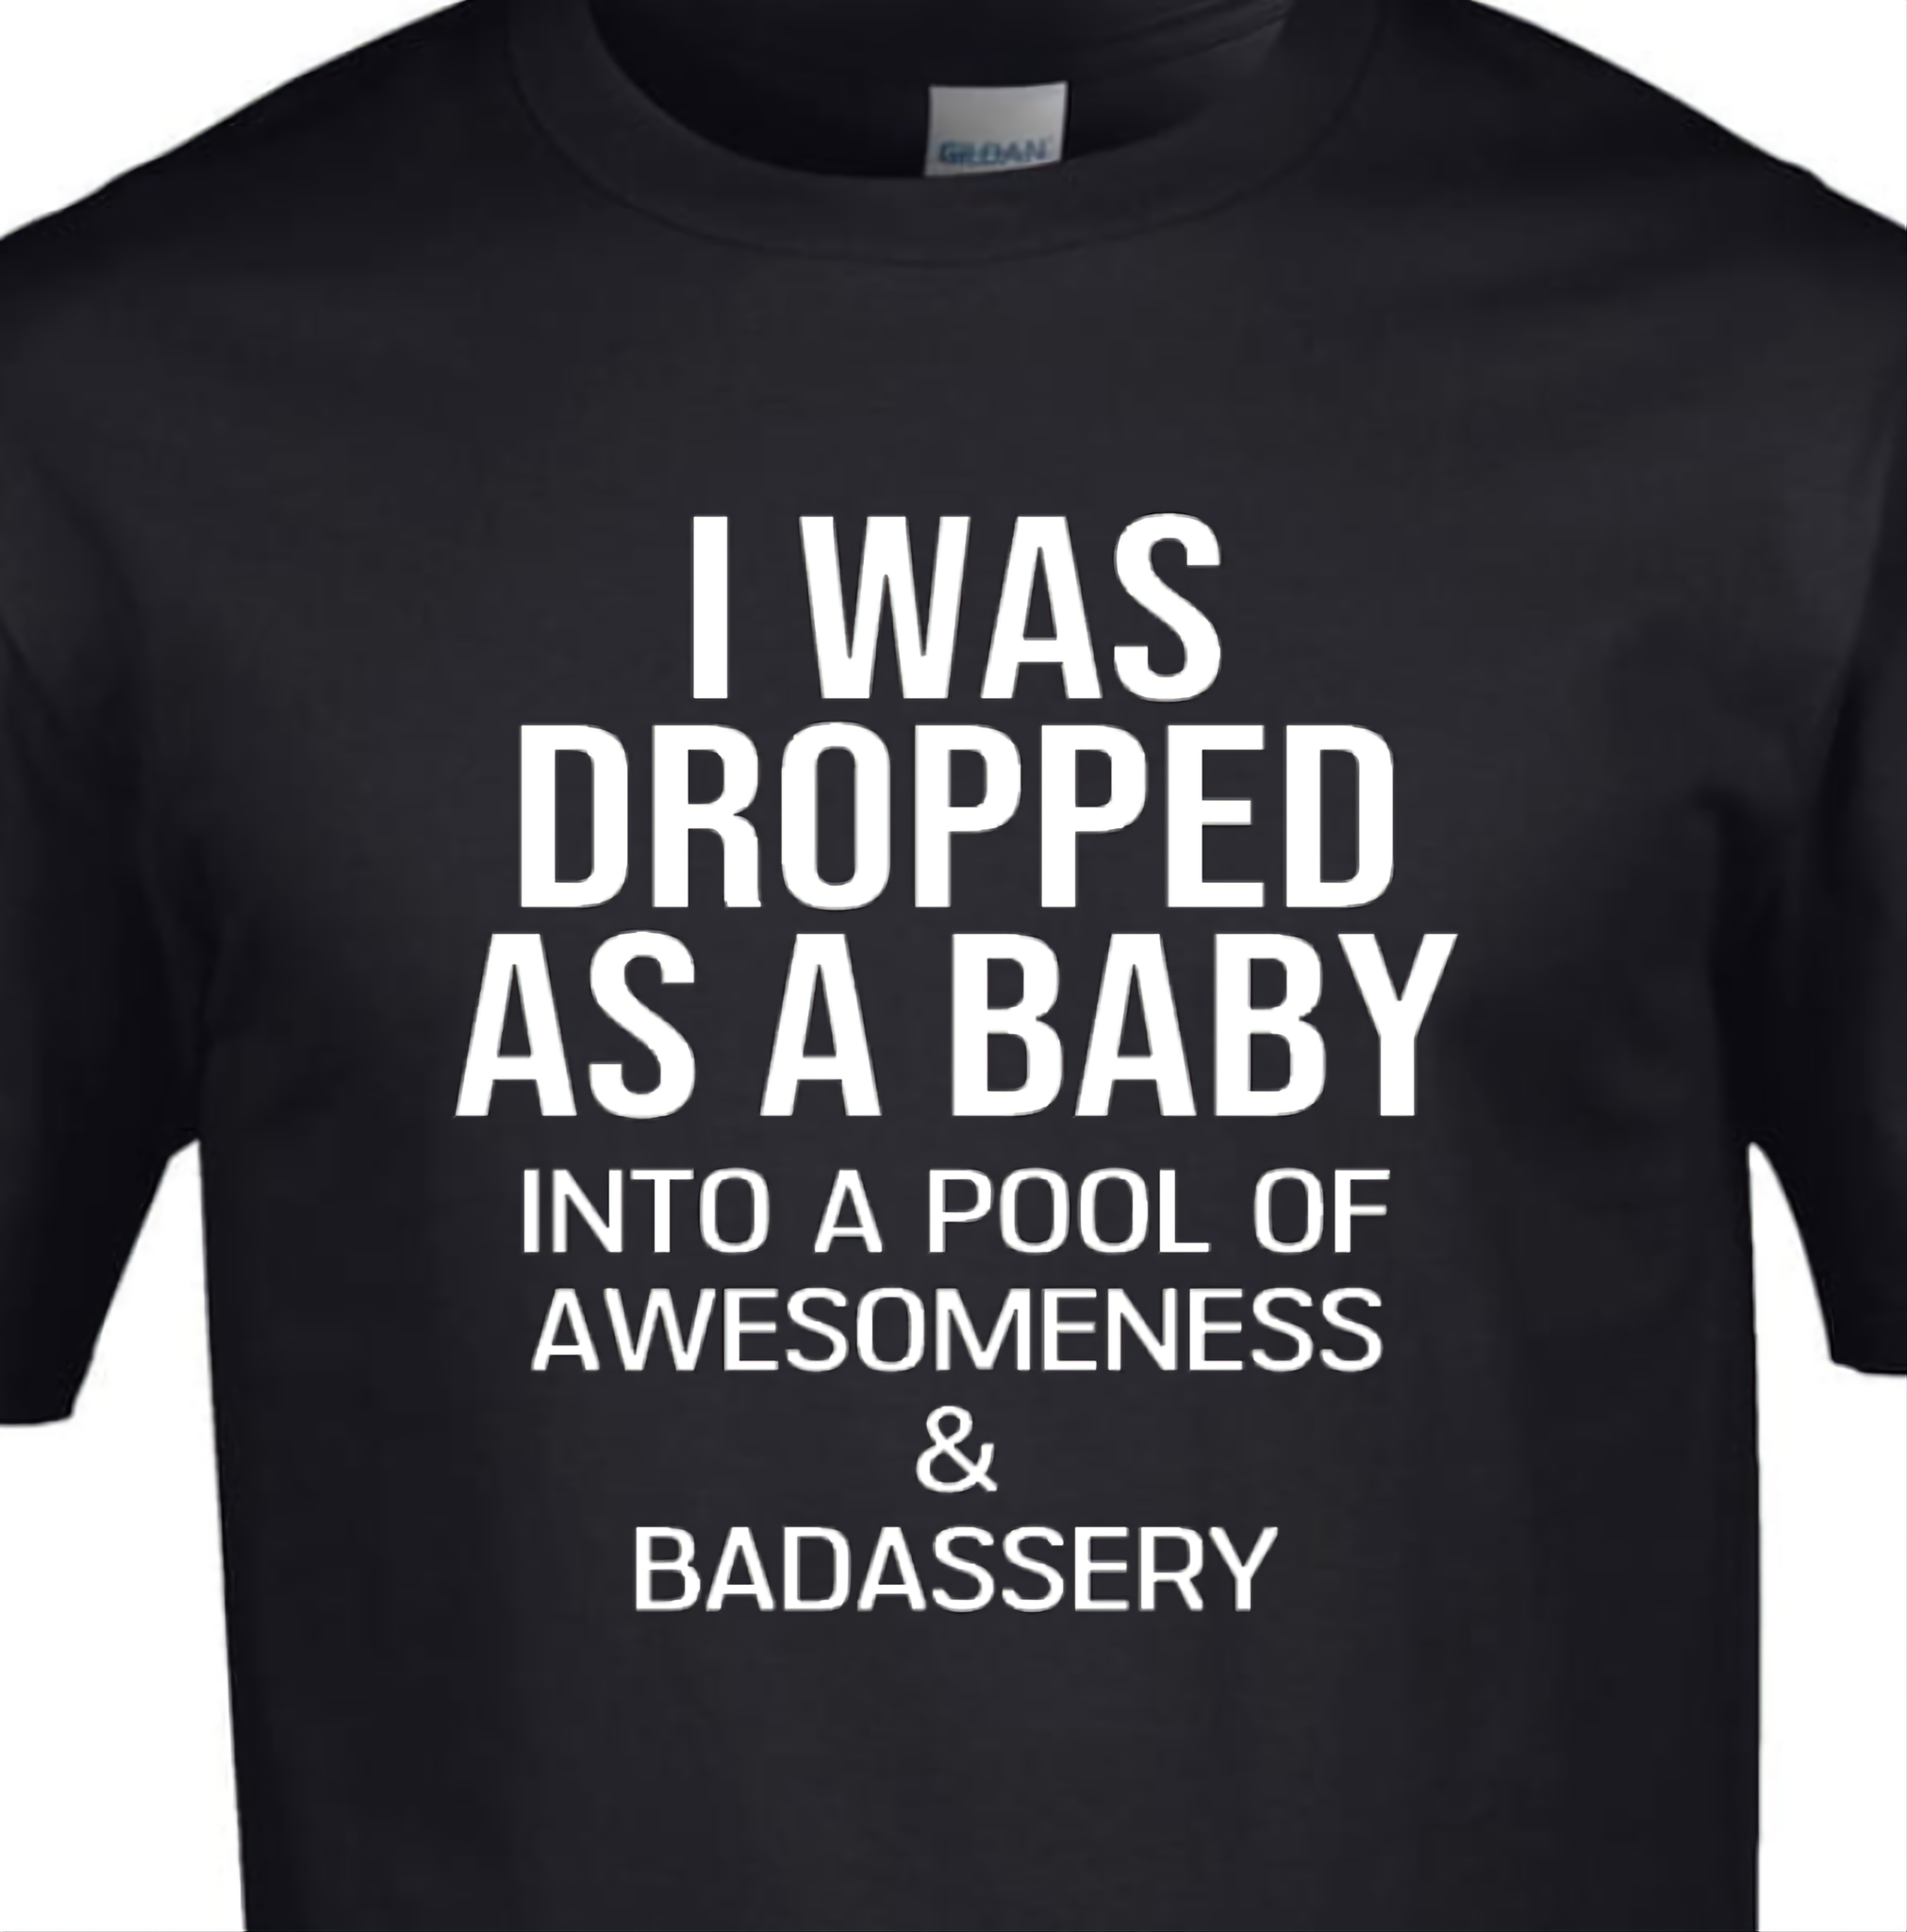 I WAS DROPPED AS A BABY